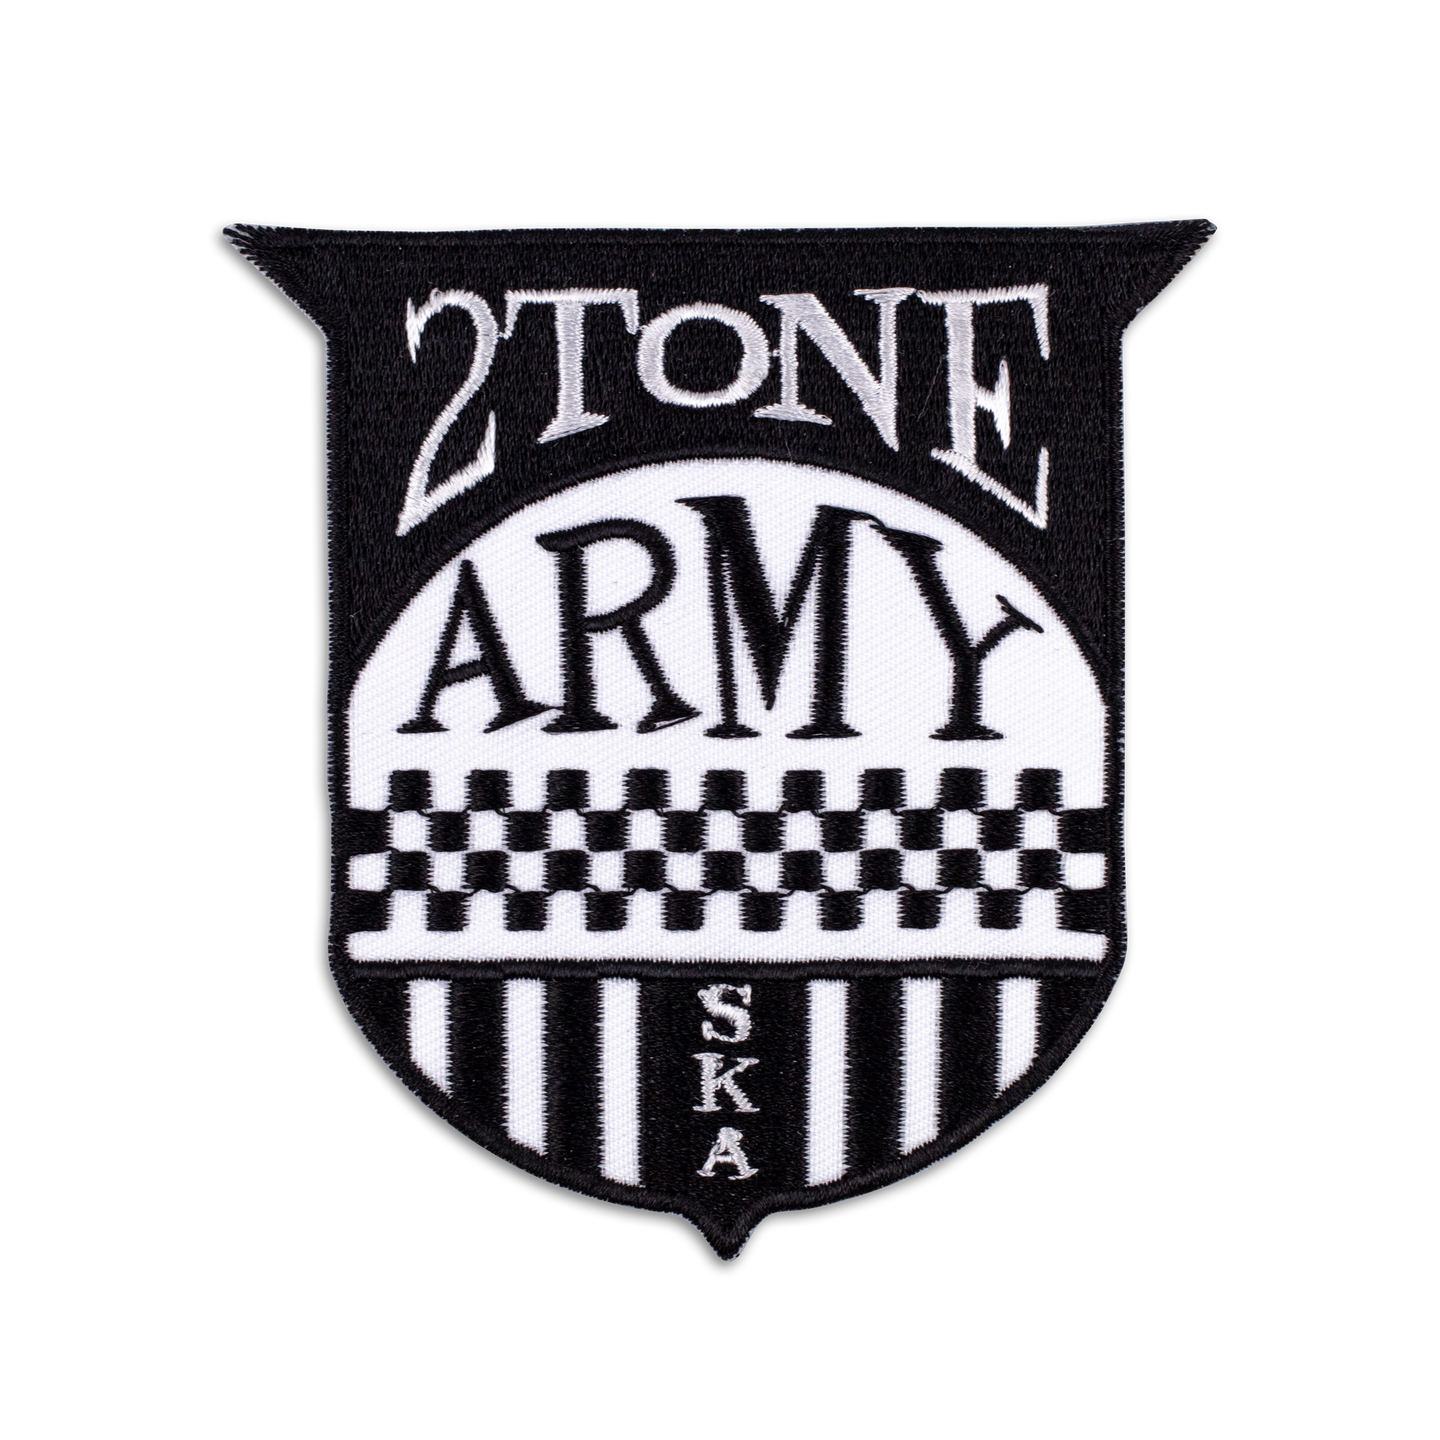 Moon Ska Records - 2 Tone Army Patch